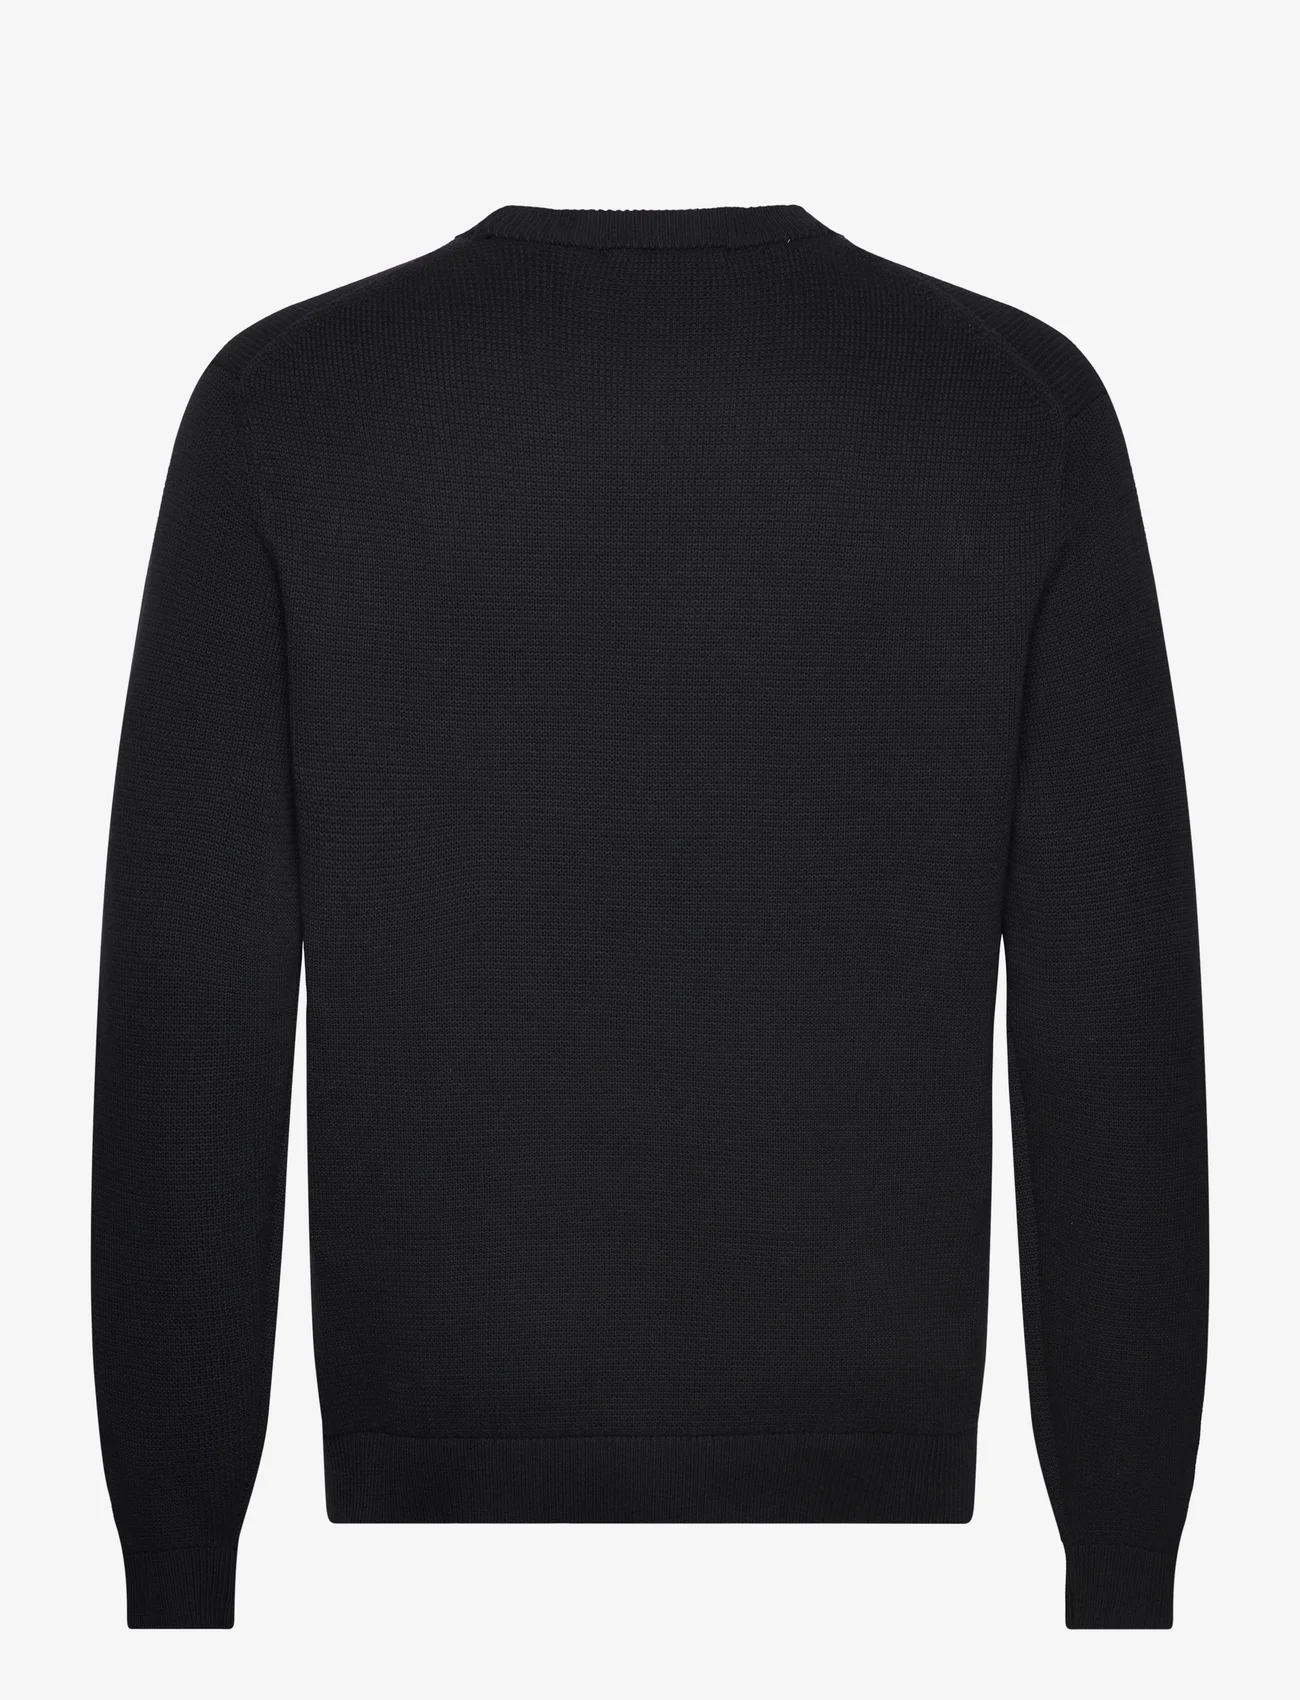 Selected Homme - SLHDANE LS KNIT STRUCTURE CREW NECK NOOS - rundhals - black - 1